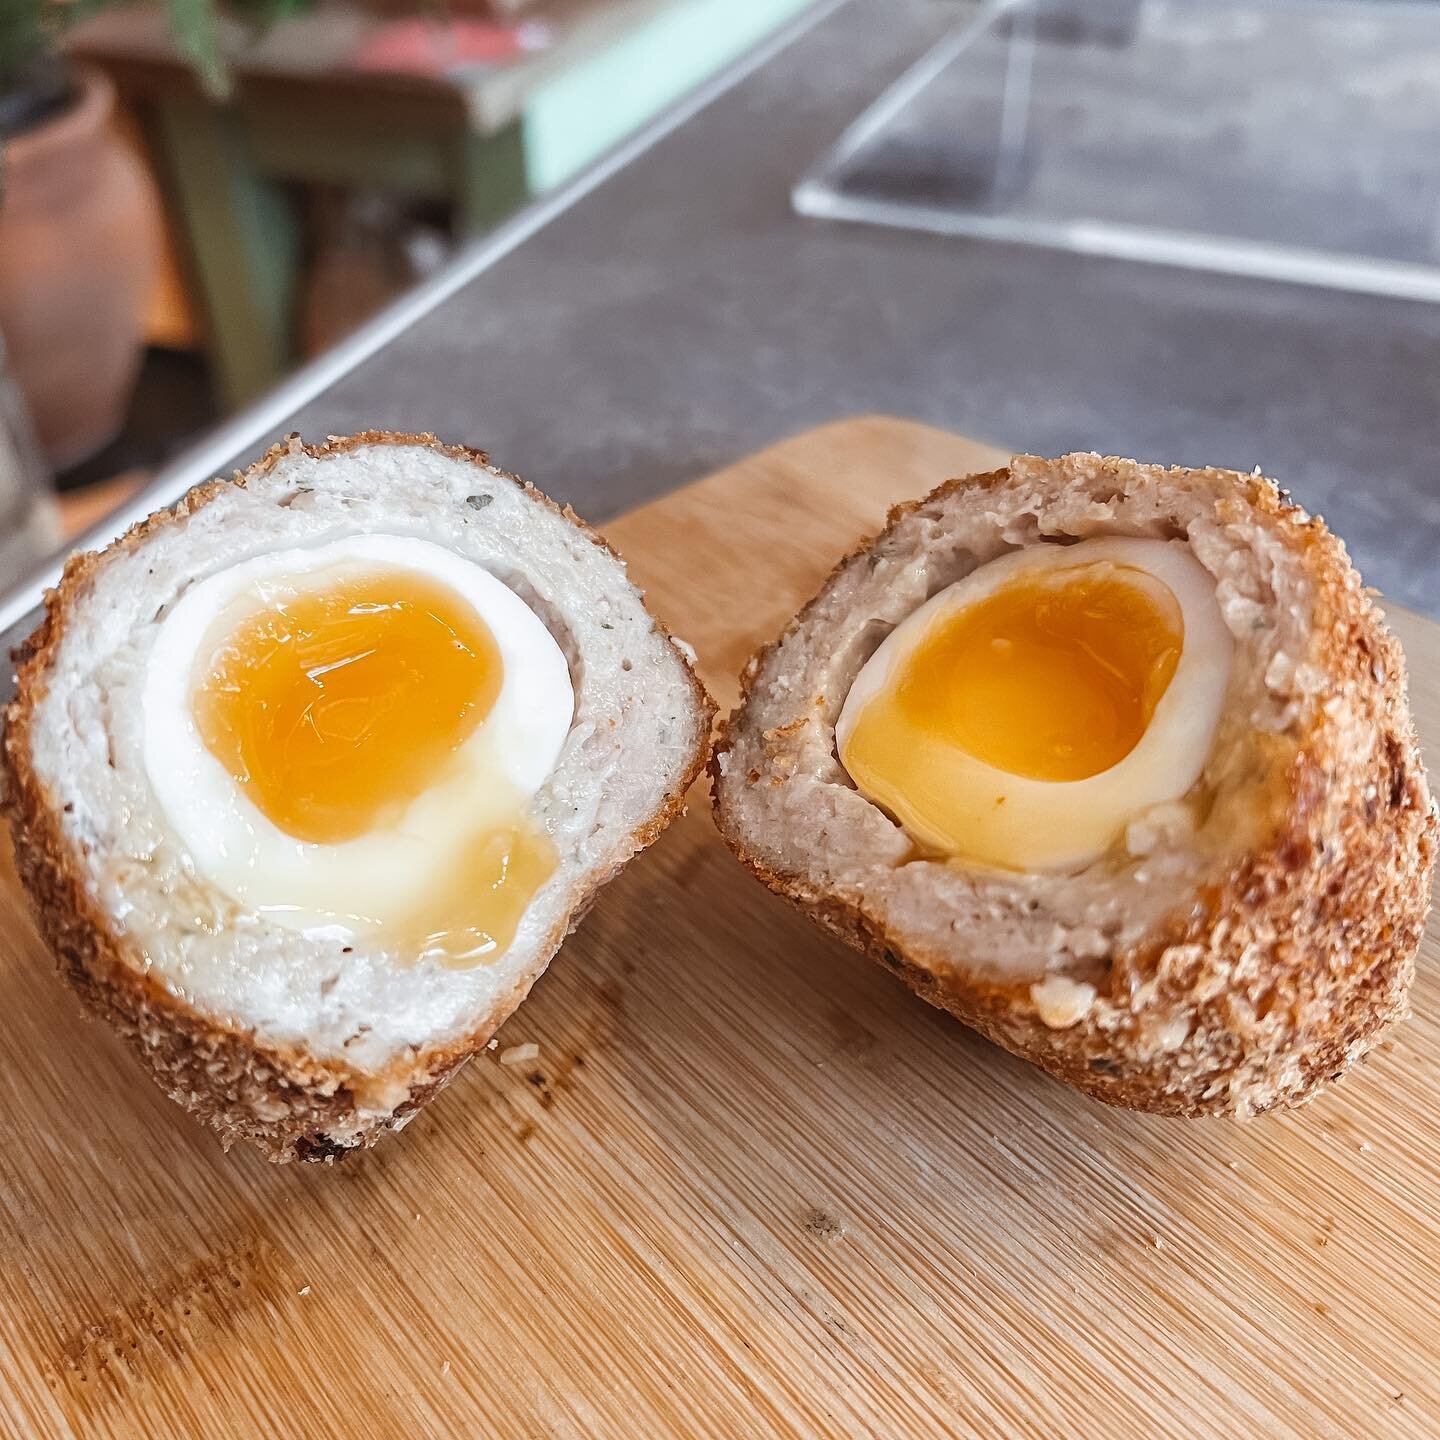 Scotch eggs are back today! Freshly made, still warm and just a little bit runny 🍳 
&bull;
#bakery #scotchegg #runnyegg #bakehouse #bakerycafe #melkshamcafe #visitwiltshire #comfortfood